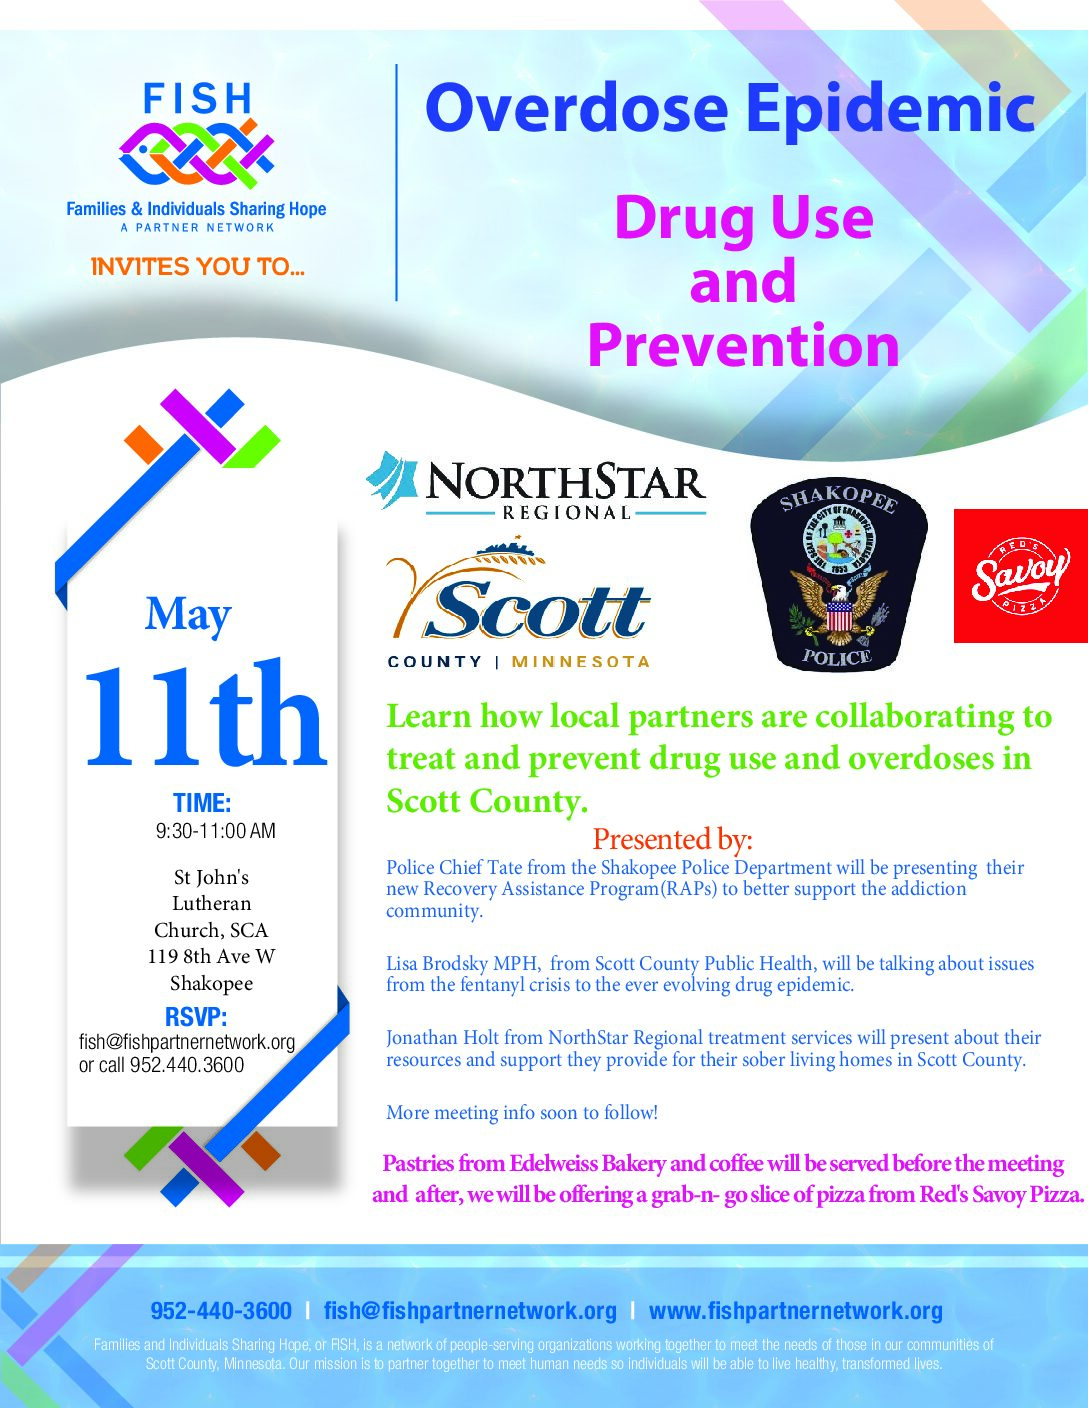 2nd Thursday Meeting on May 11th: Overdose Epidemic, Drug use and Prevention